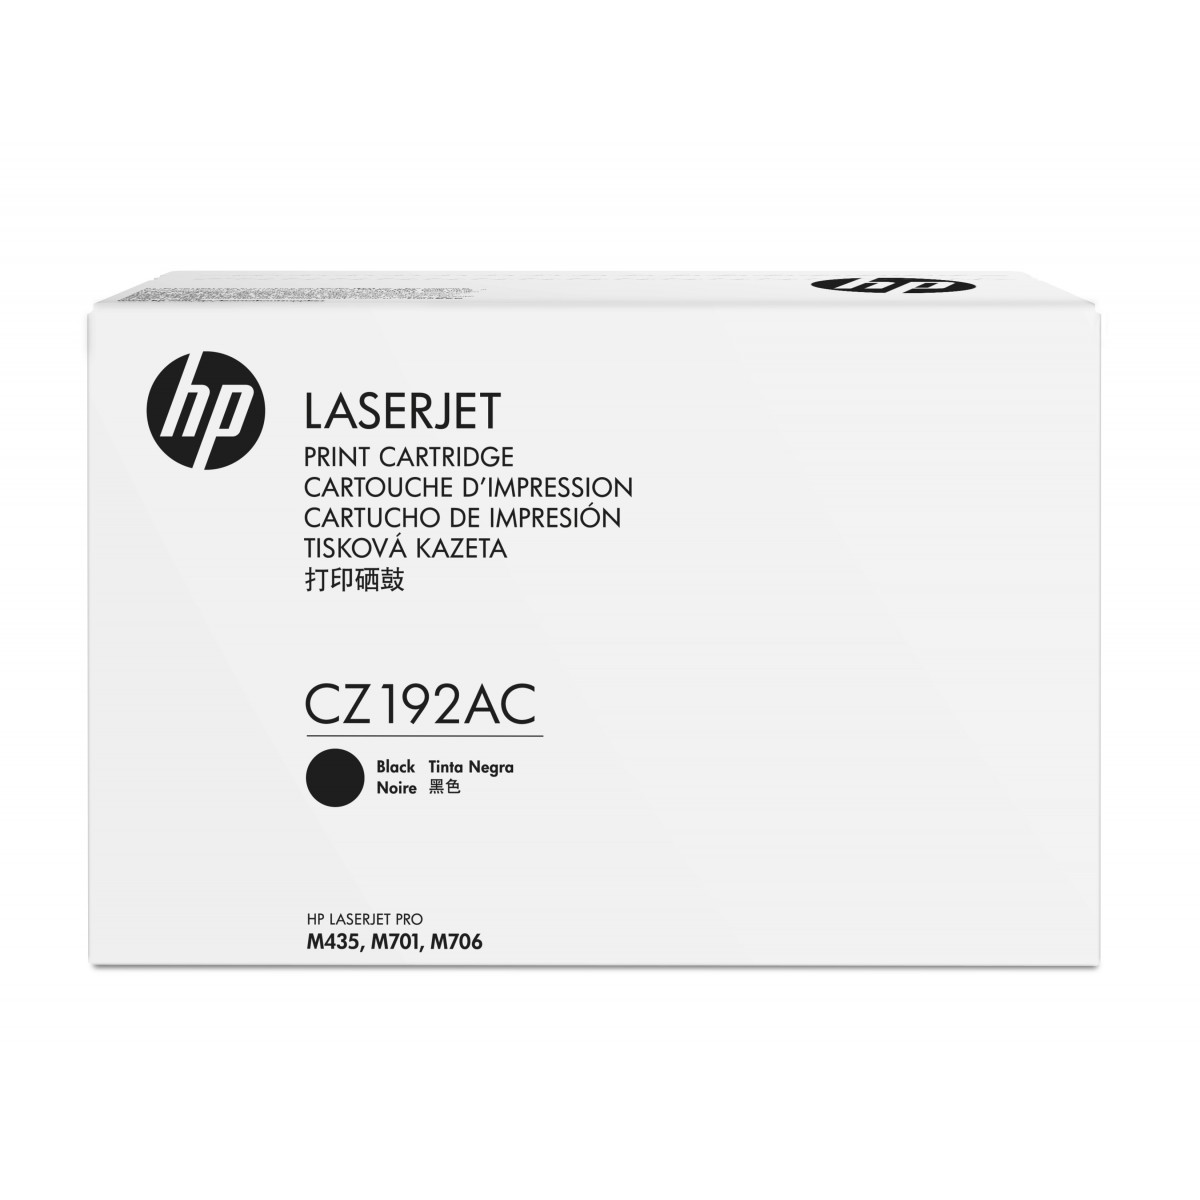 HP 93A Blk Contract LJ Toner Cartridge - 12000 pages - Black - 1 pc(s)